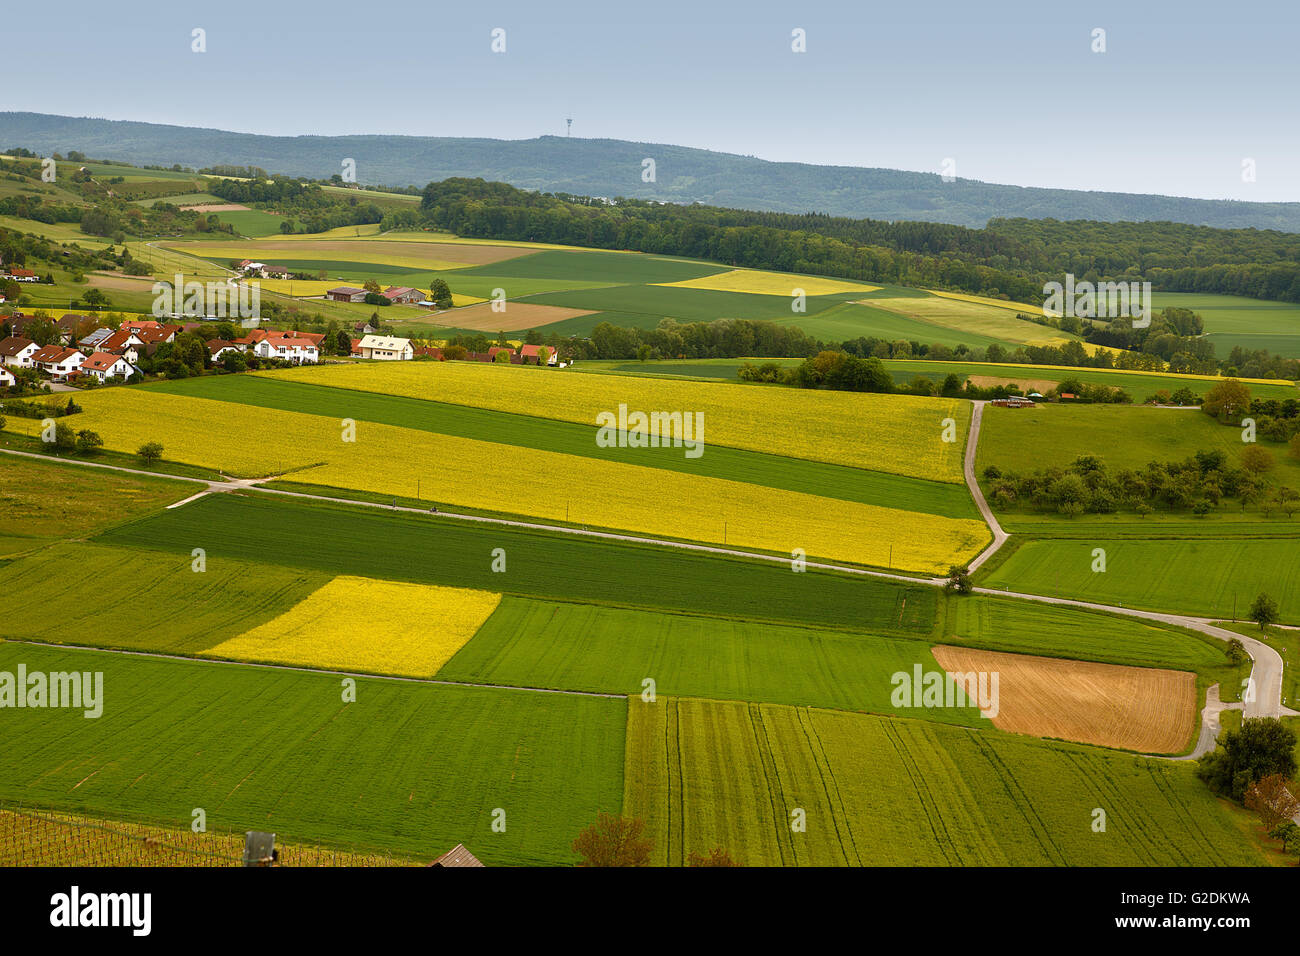 Vineyards in South West Germany Stock Photo